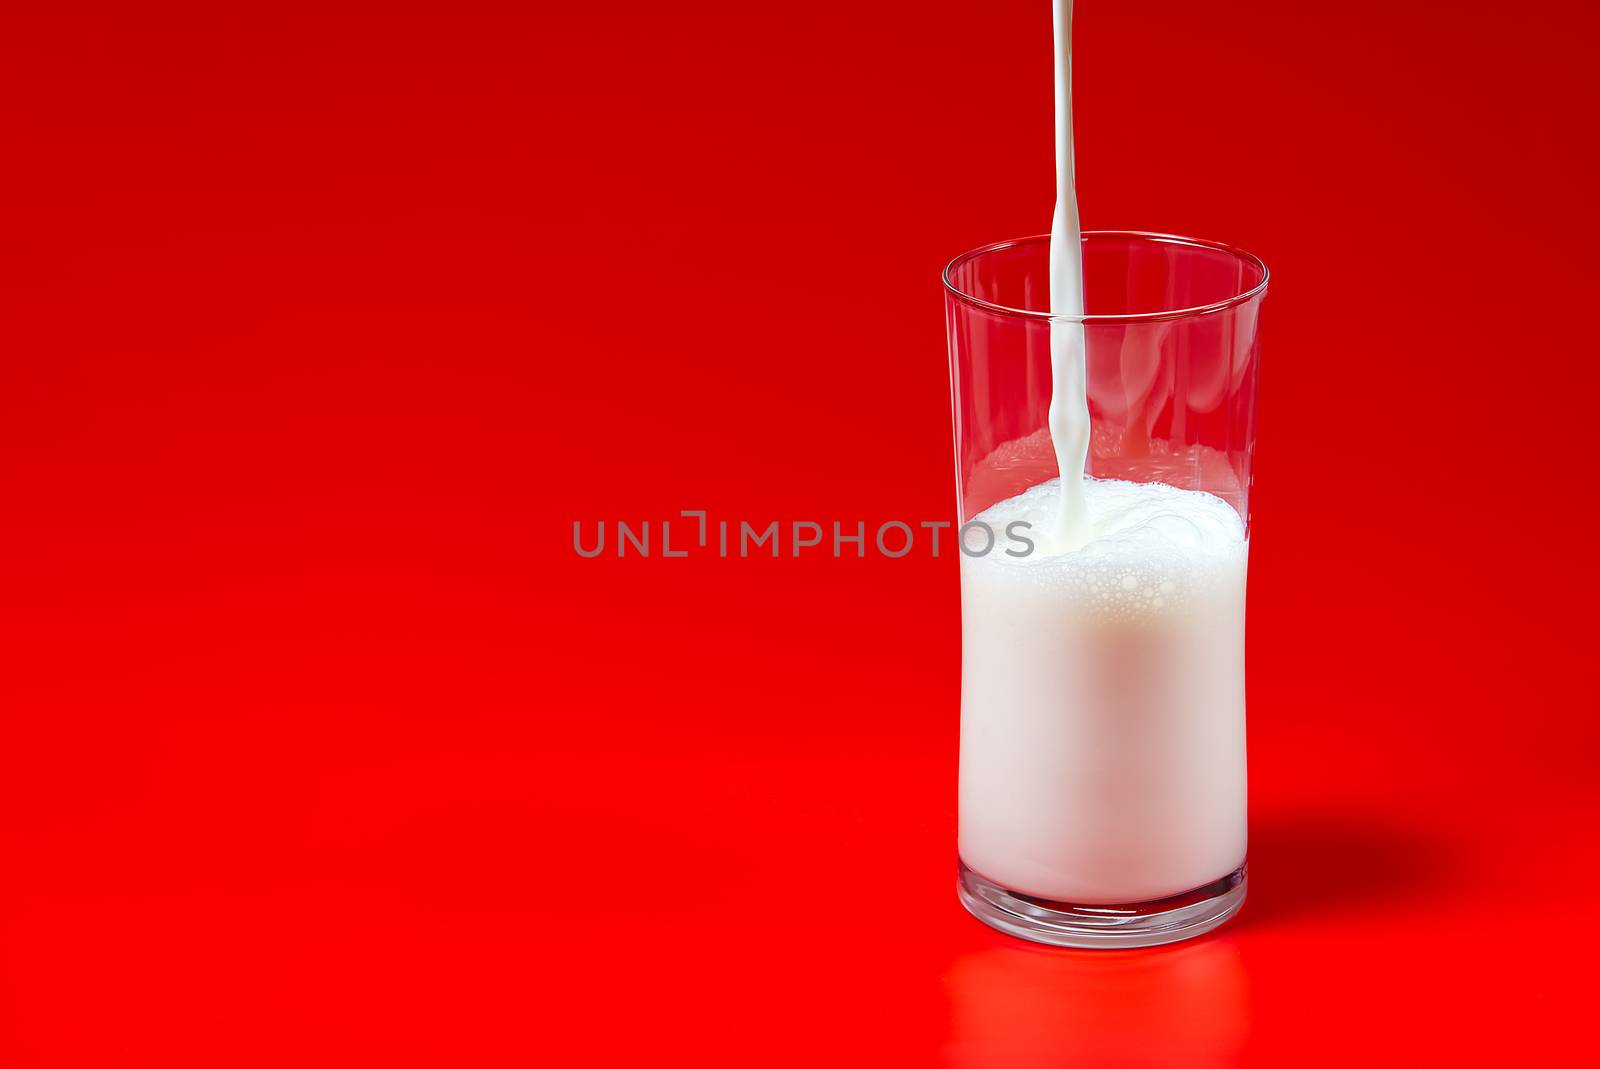 milk is poured into a glass transparent glass on a red background. by PhotoTime